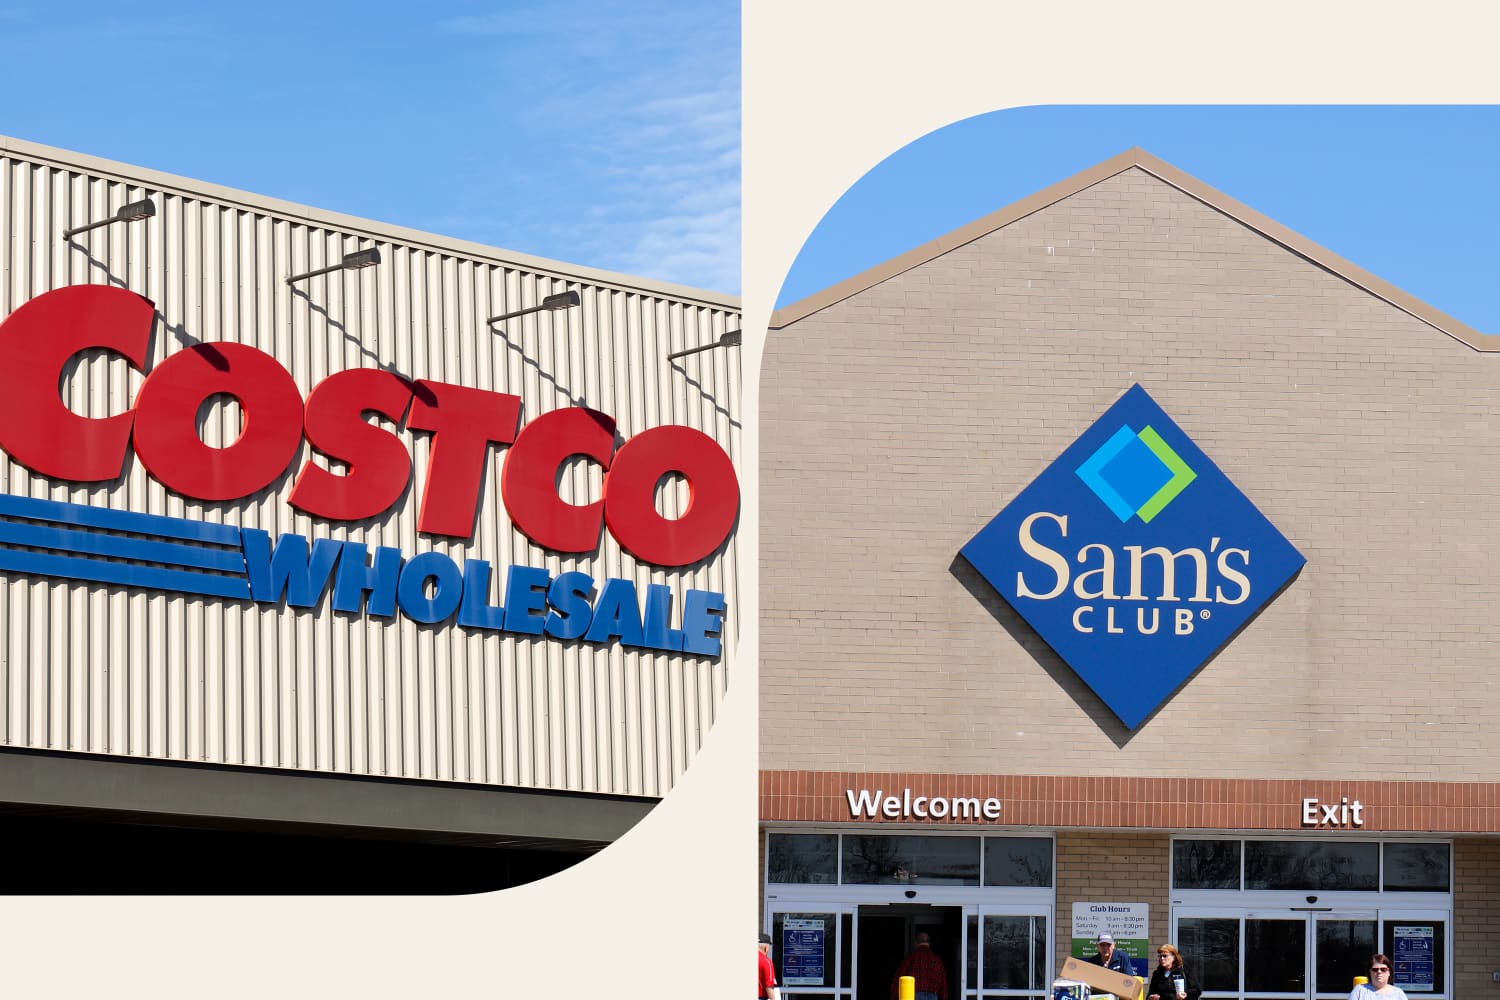 More ways to save money with Costco and Sam's Club